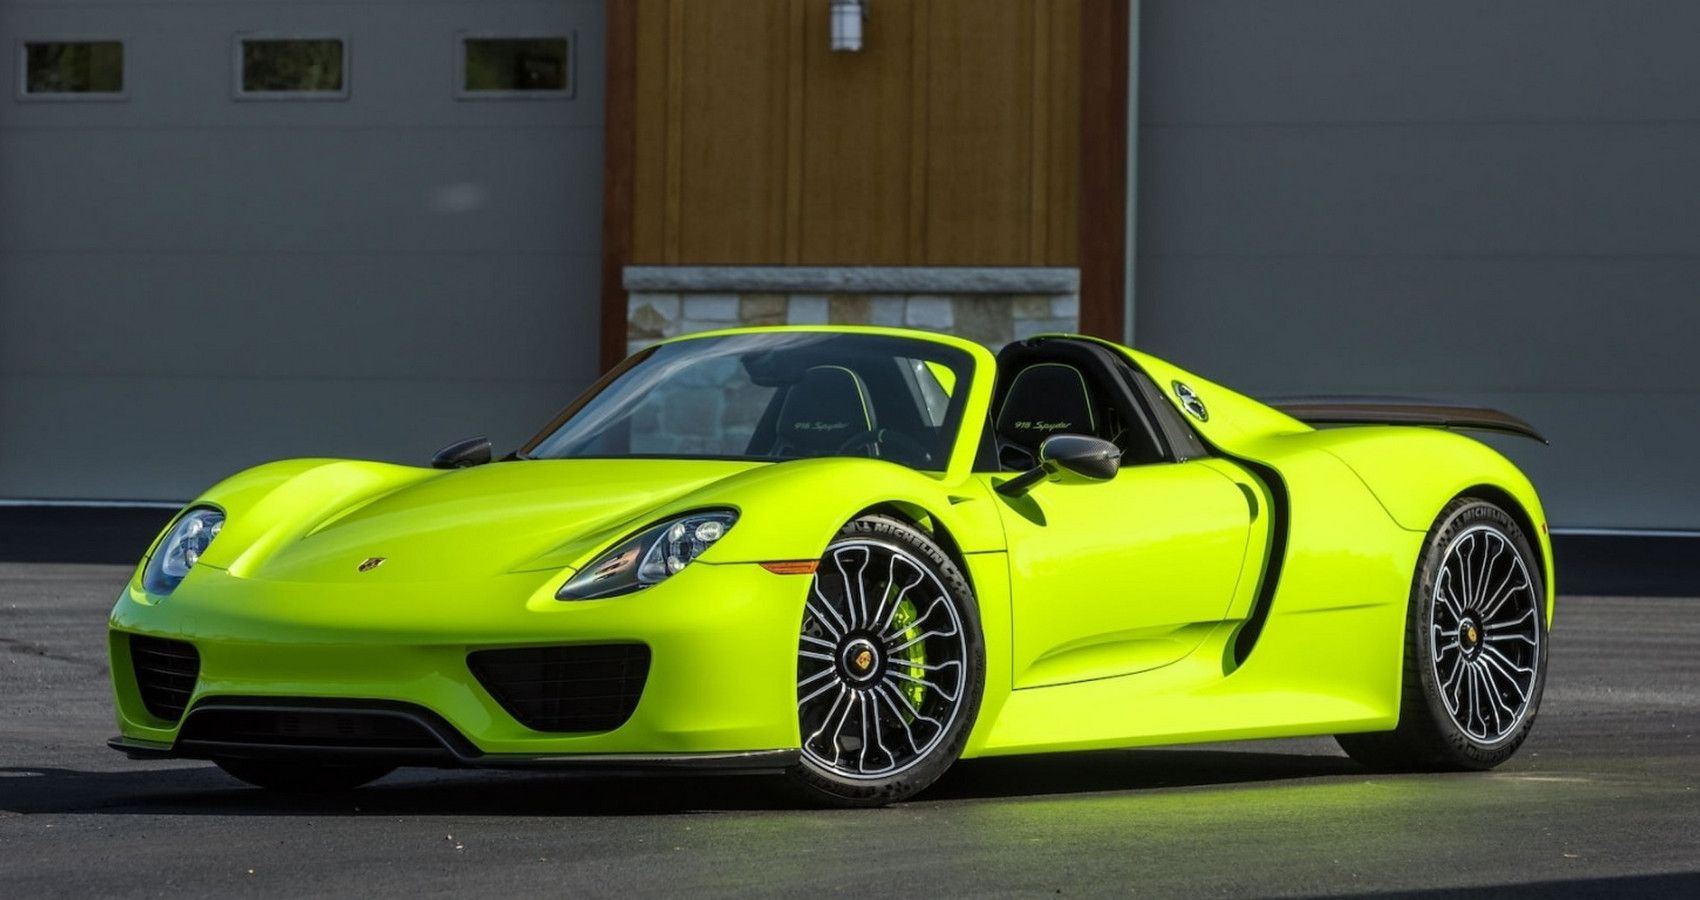 The GearBox: Styled For The Porsche 918 Sypder